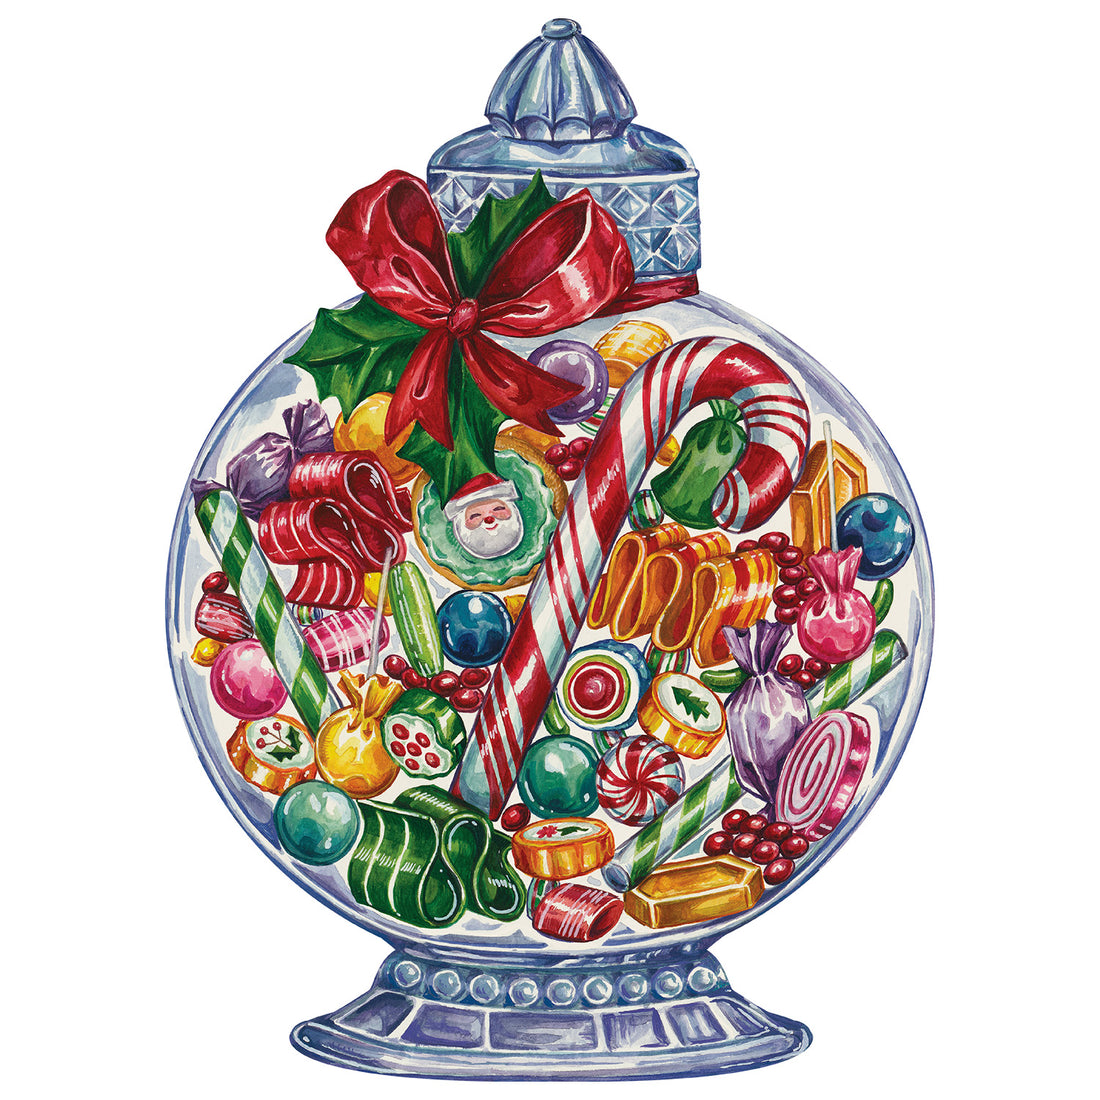 An illustrated, ornate glass jar full of colorful vintage Christmas candies, with a red ribbon tied in a bow with holly leaves around the lid.